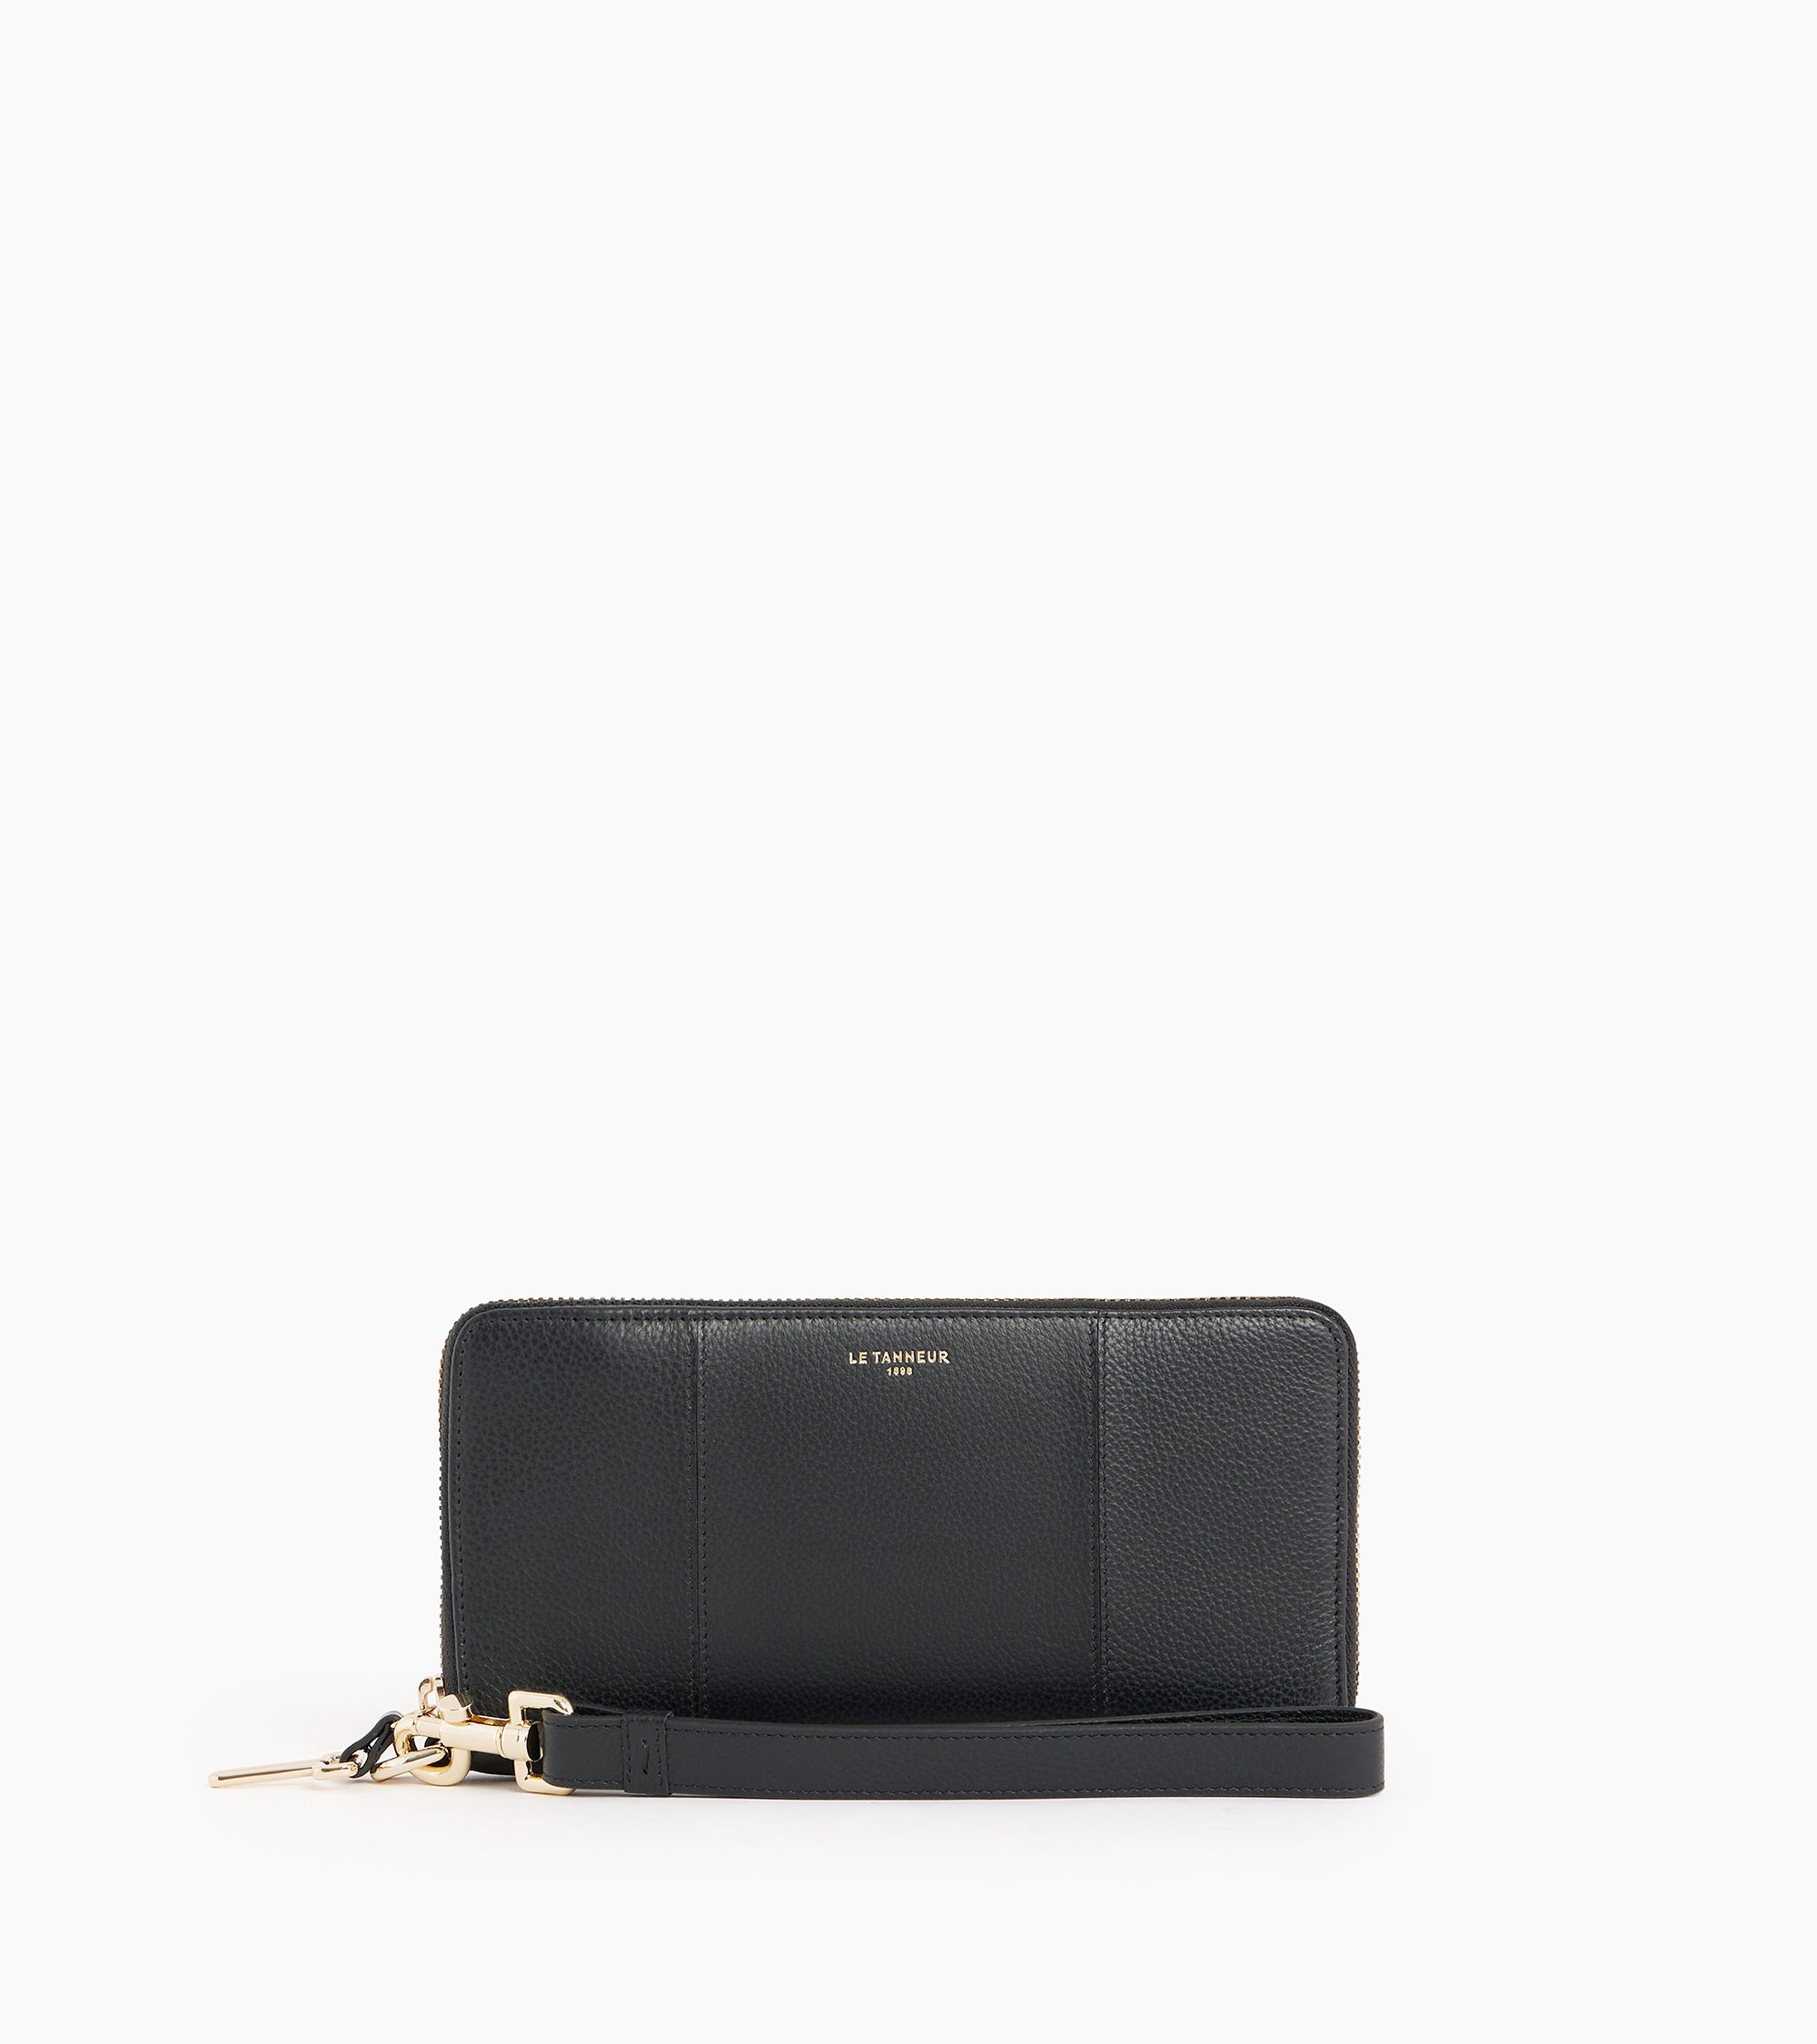 Juliette zipped travel companion in pebbled leather